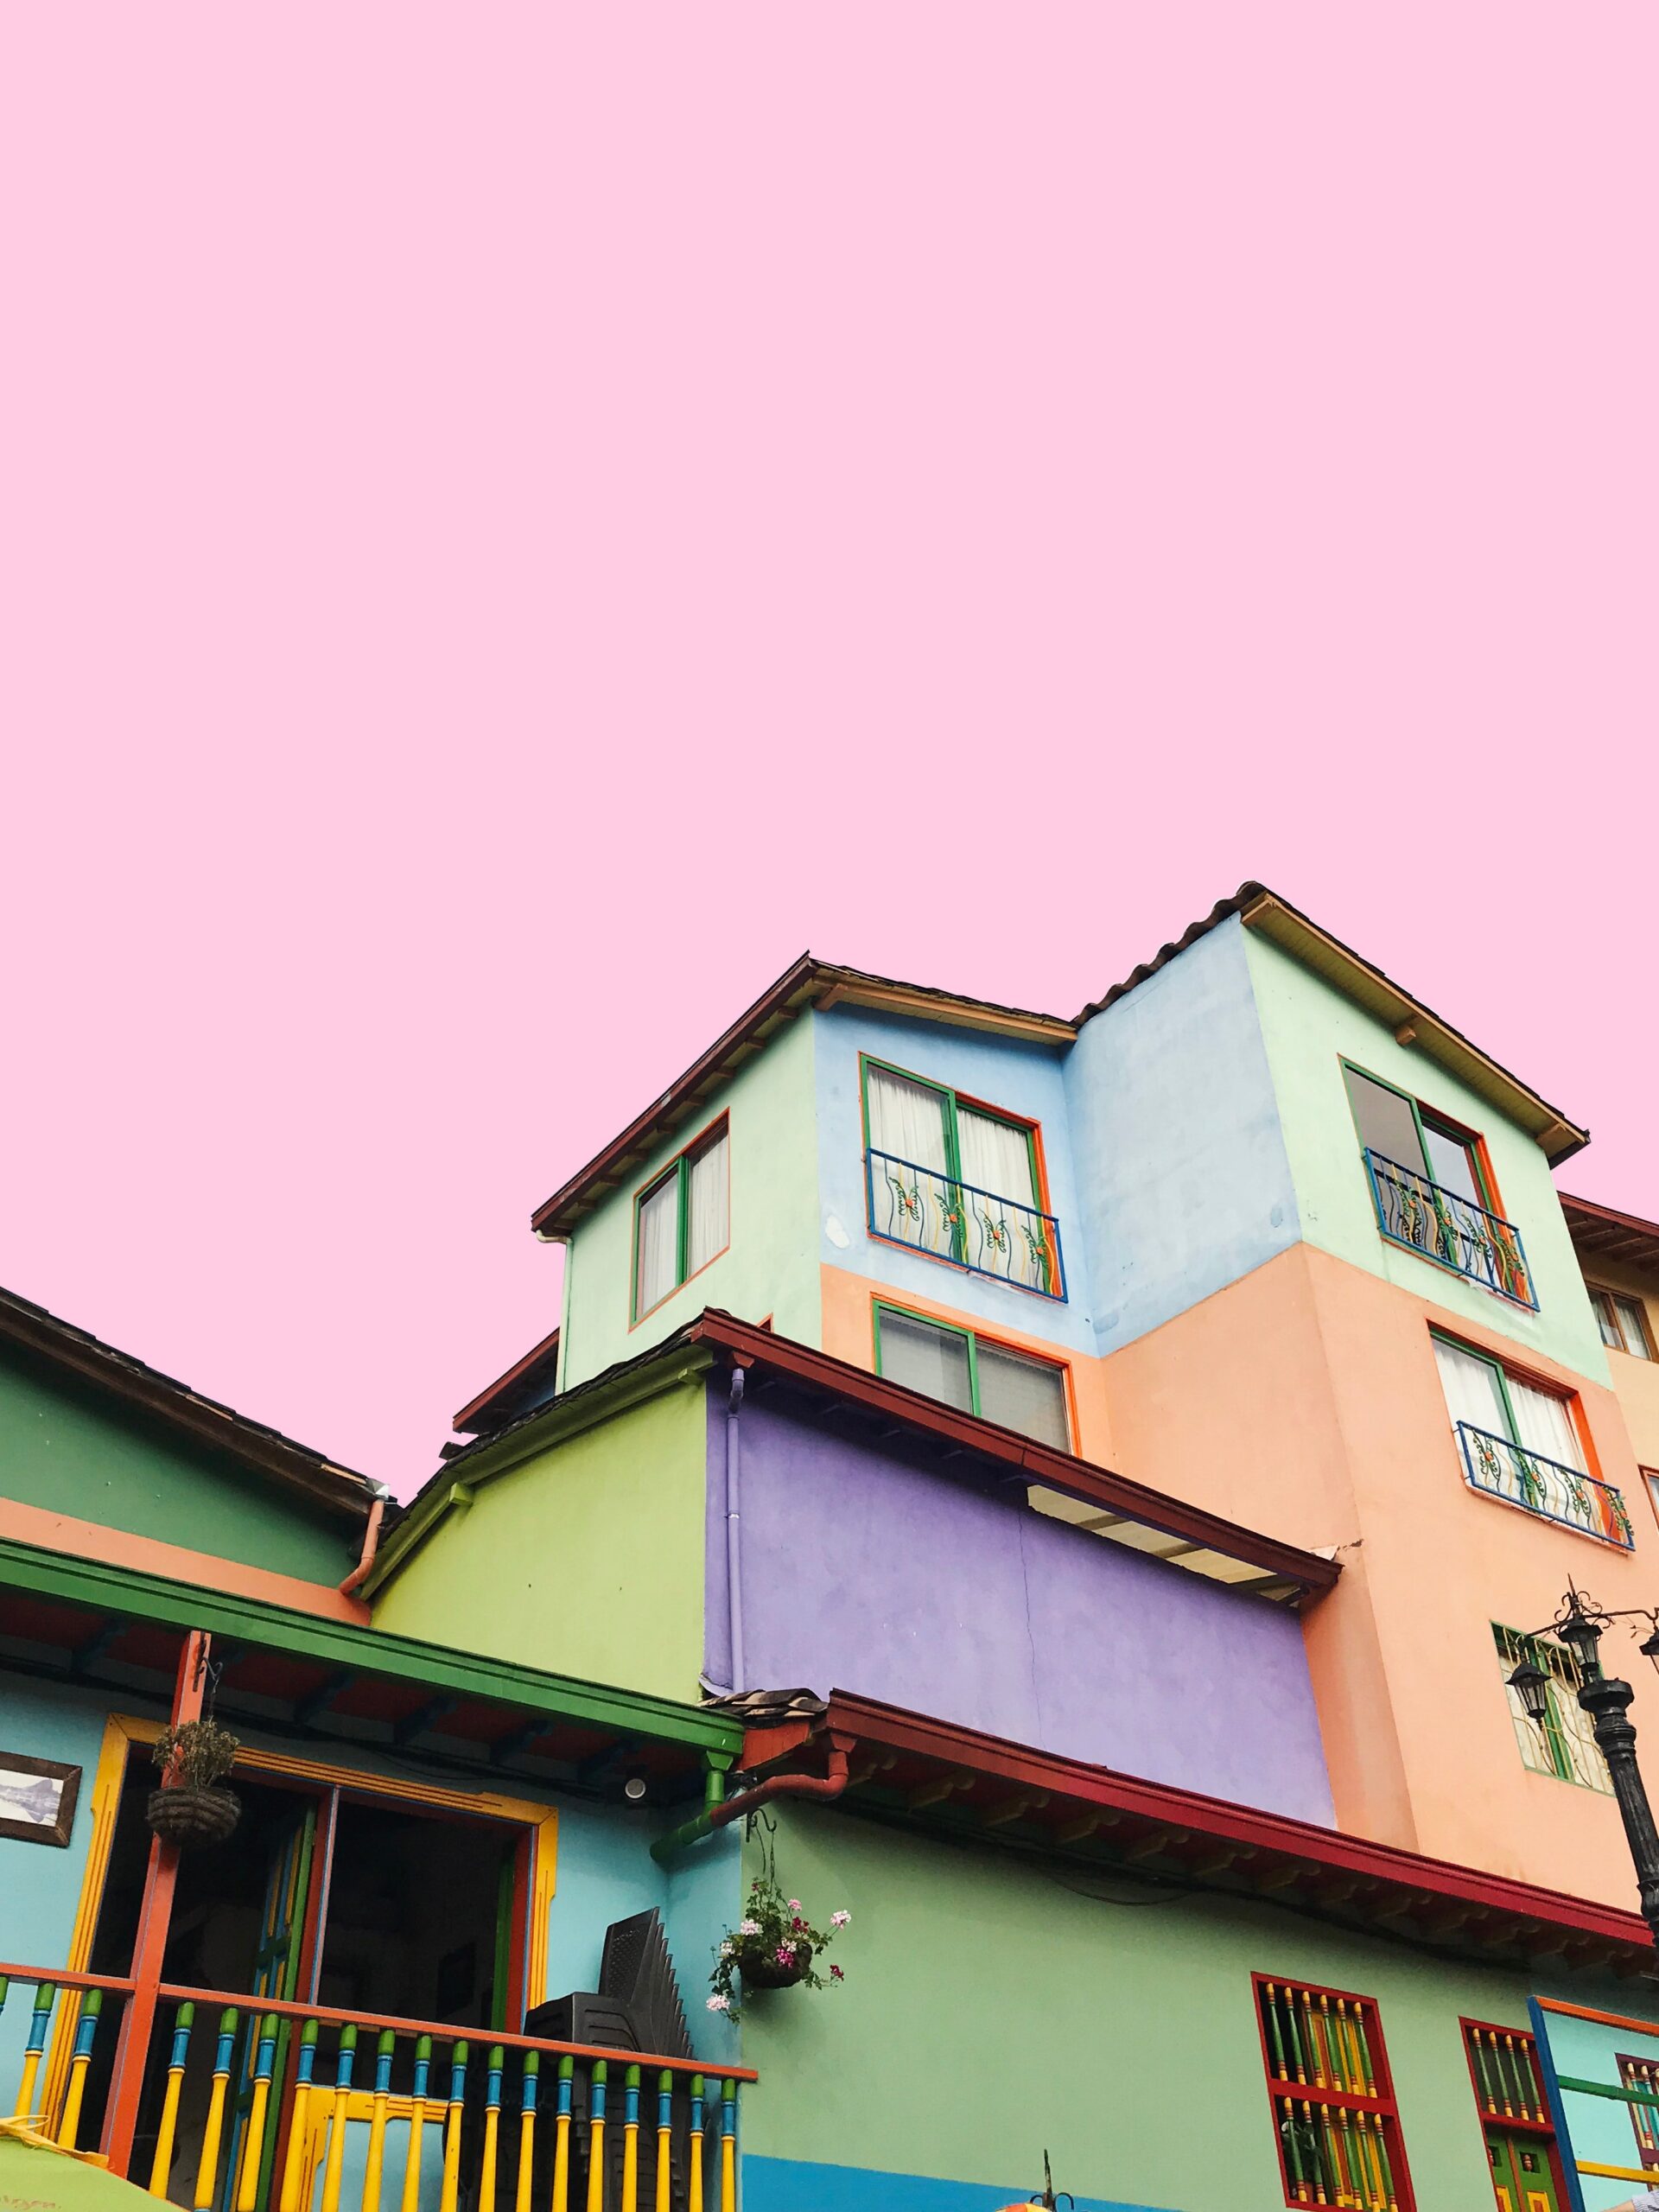 apartment building painted in bright pastel colors against a light pink sky